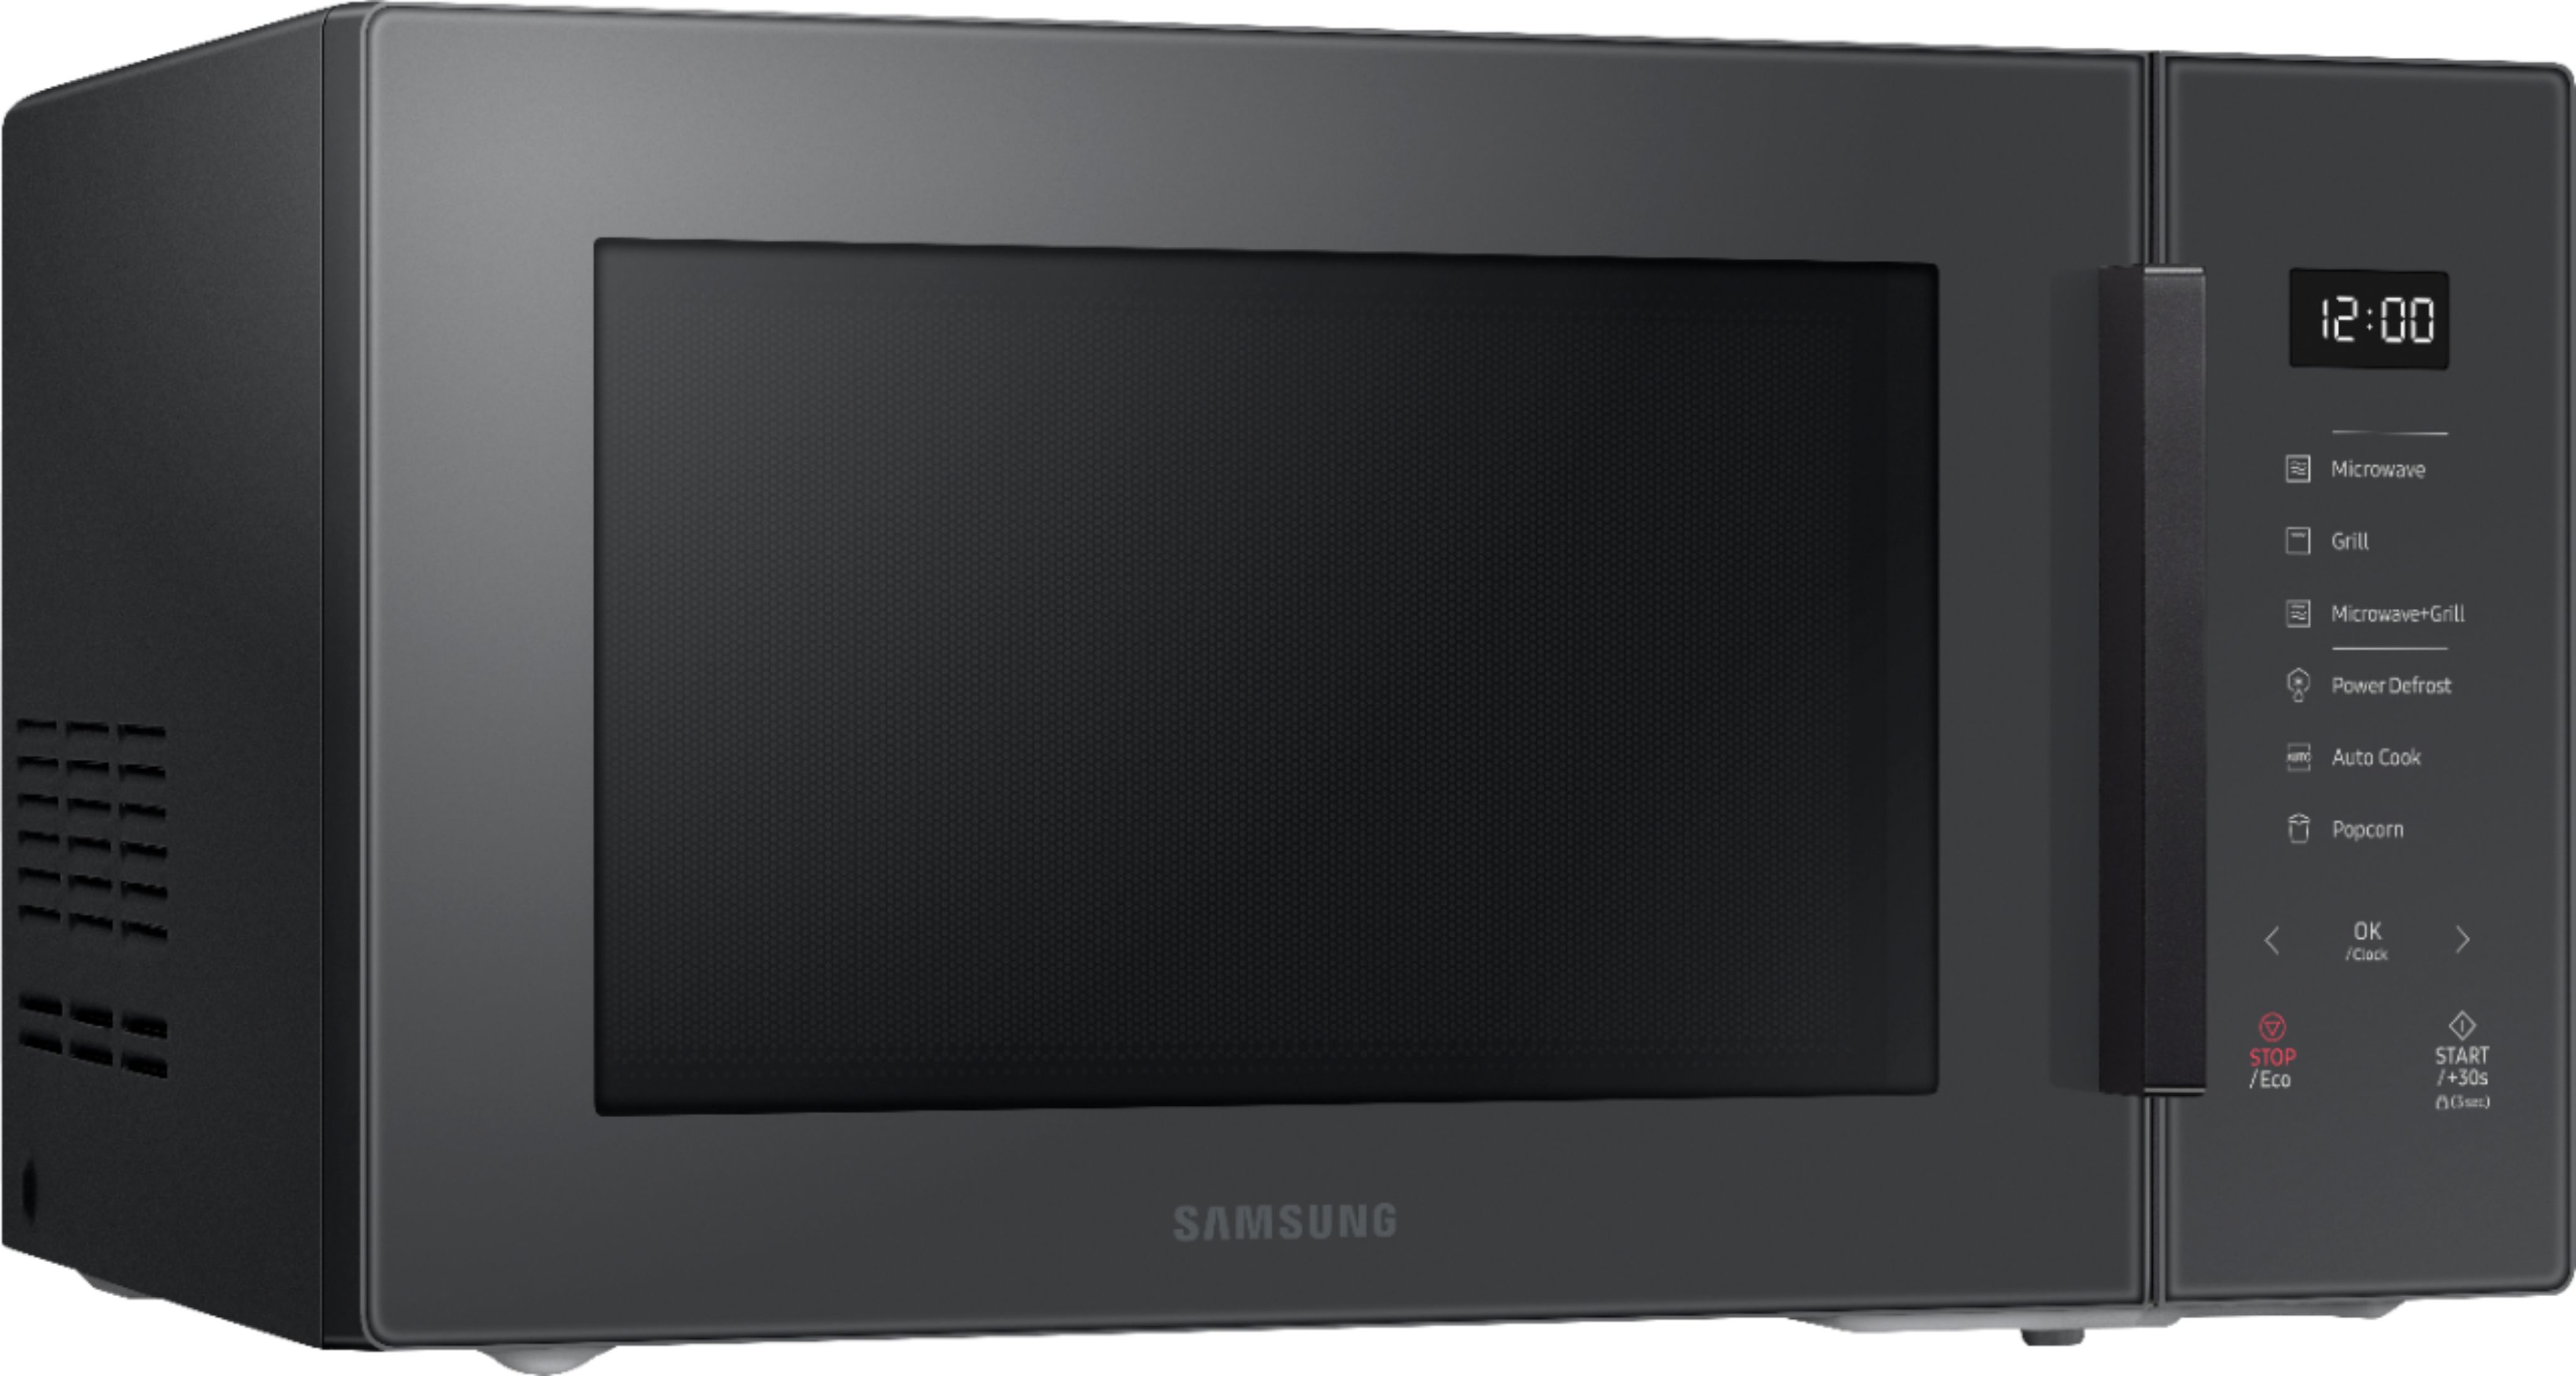 Angle View: Samsung - 1.1 cu. ft. Countertop Microwave with Grilling Element - Charcoal